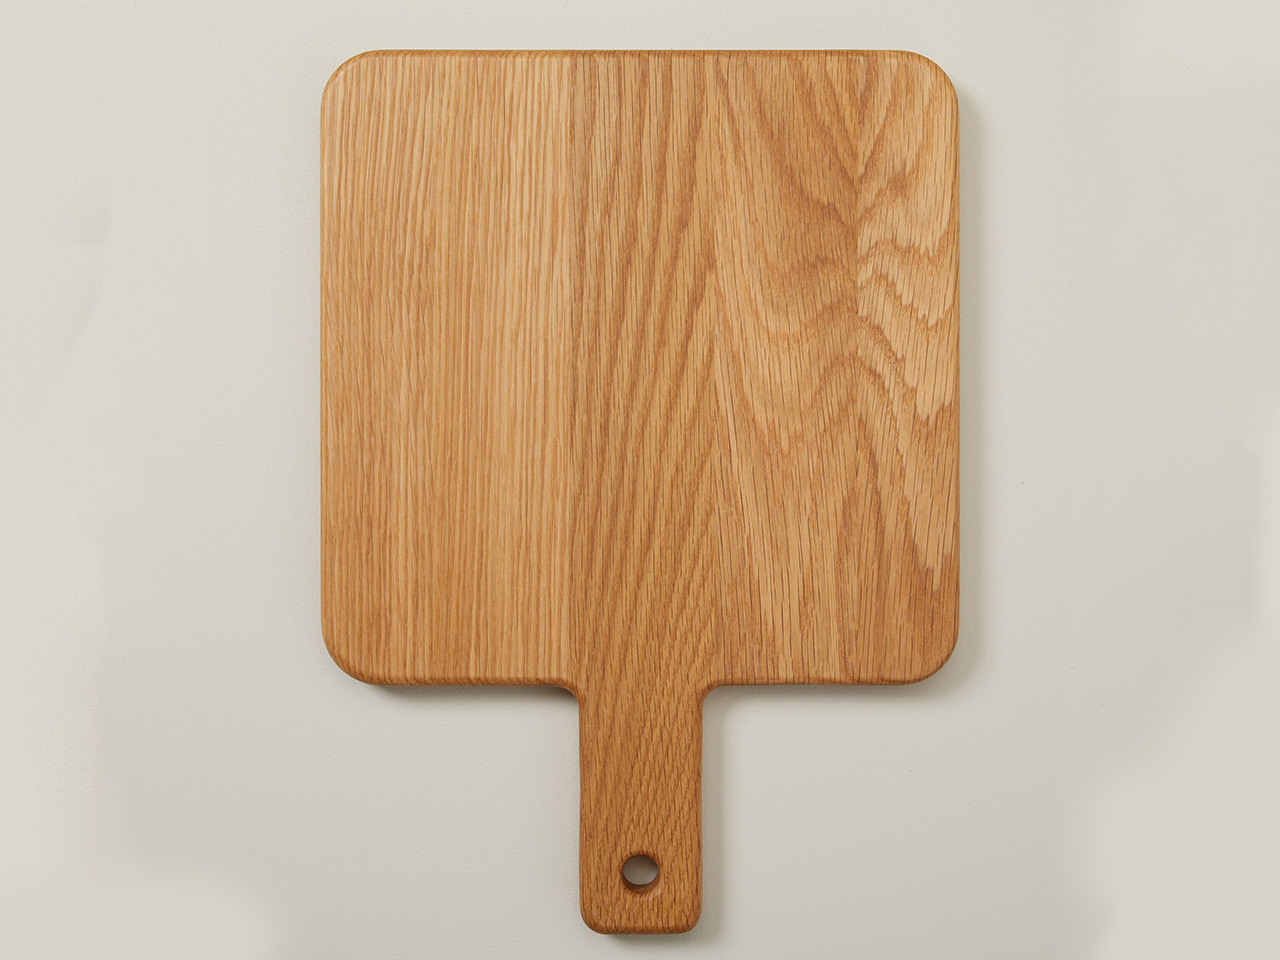 An oak wood board from Oui at Indigo for summer outdoor entertaining.